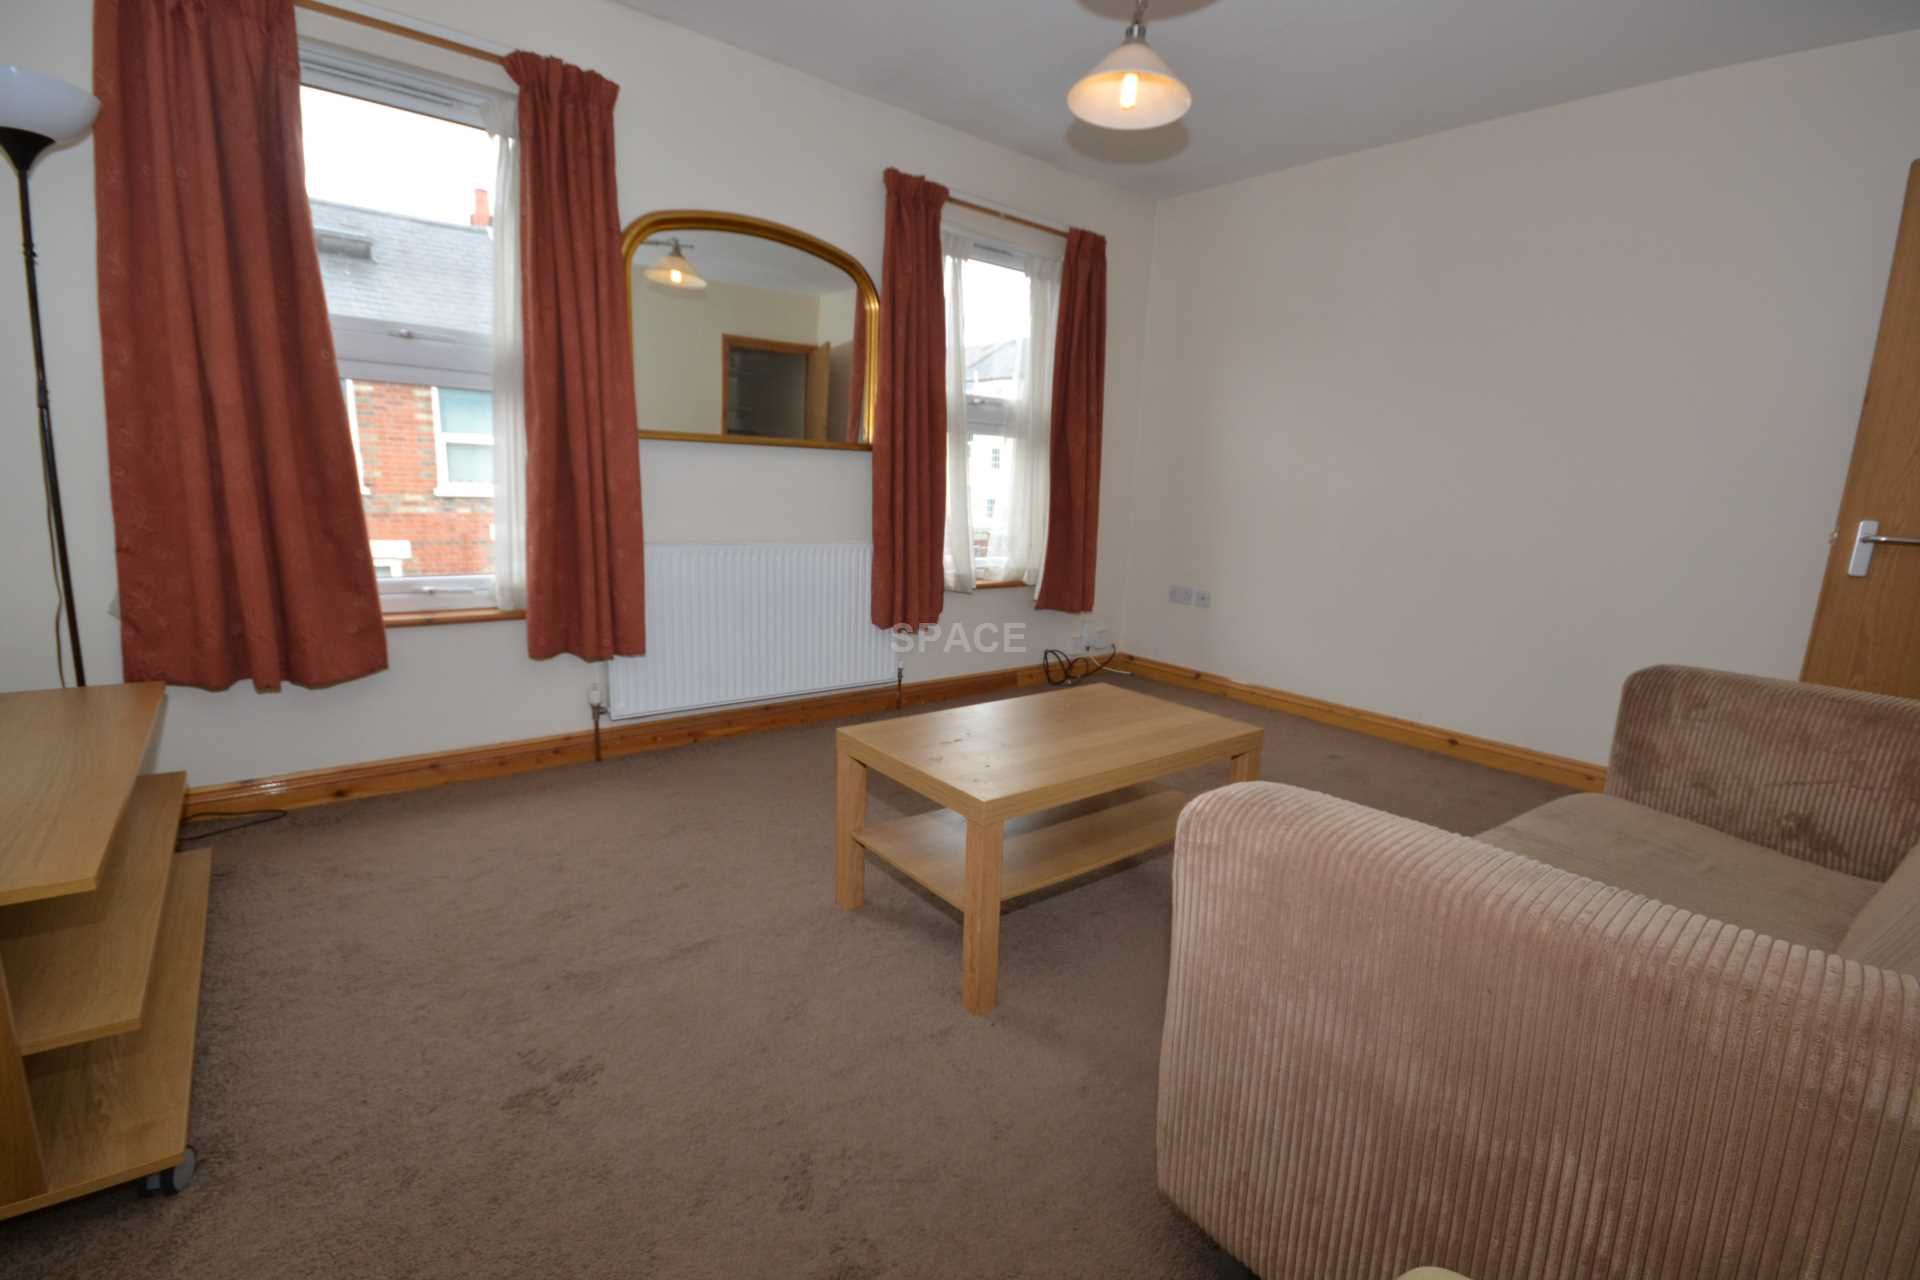 1 Bedroom Flat To Rent Stanley Grove Reading Rg1 7ns